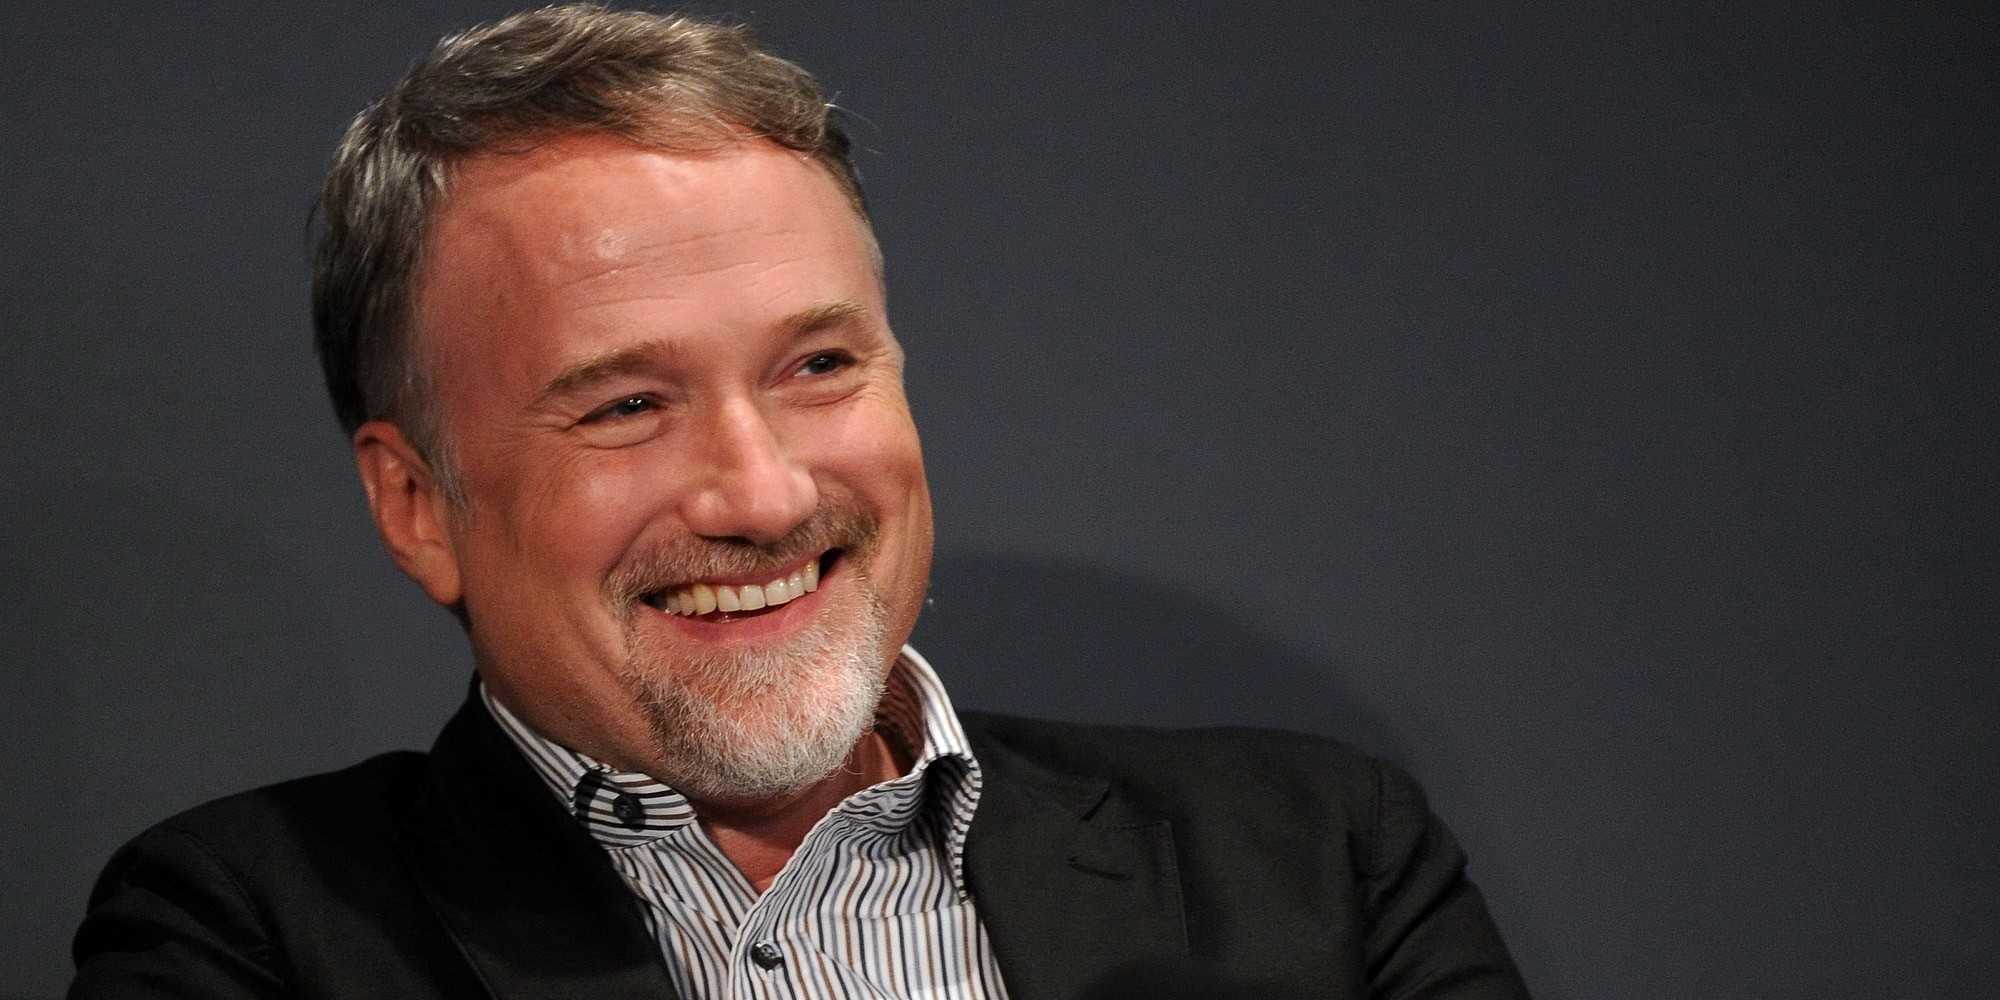 David Fincher's candid deal with Netflix: modest projects over Mindhunter